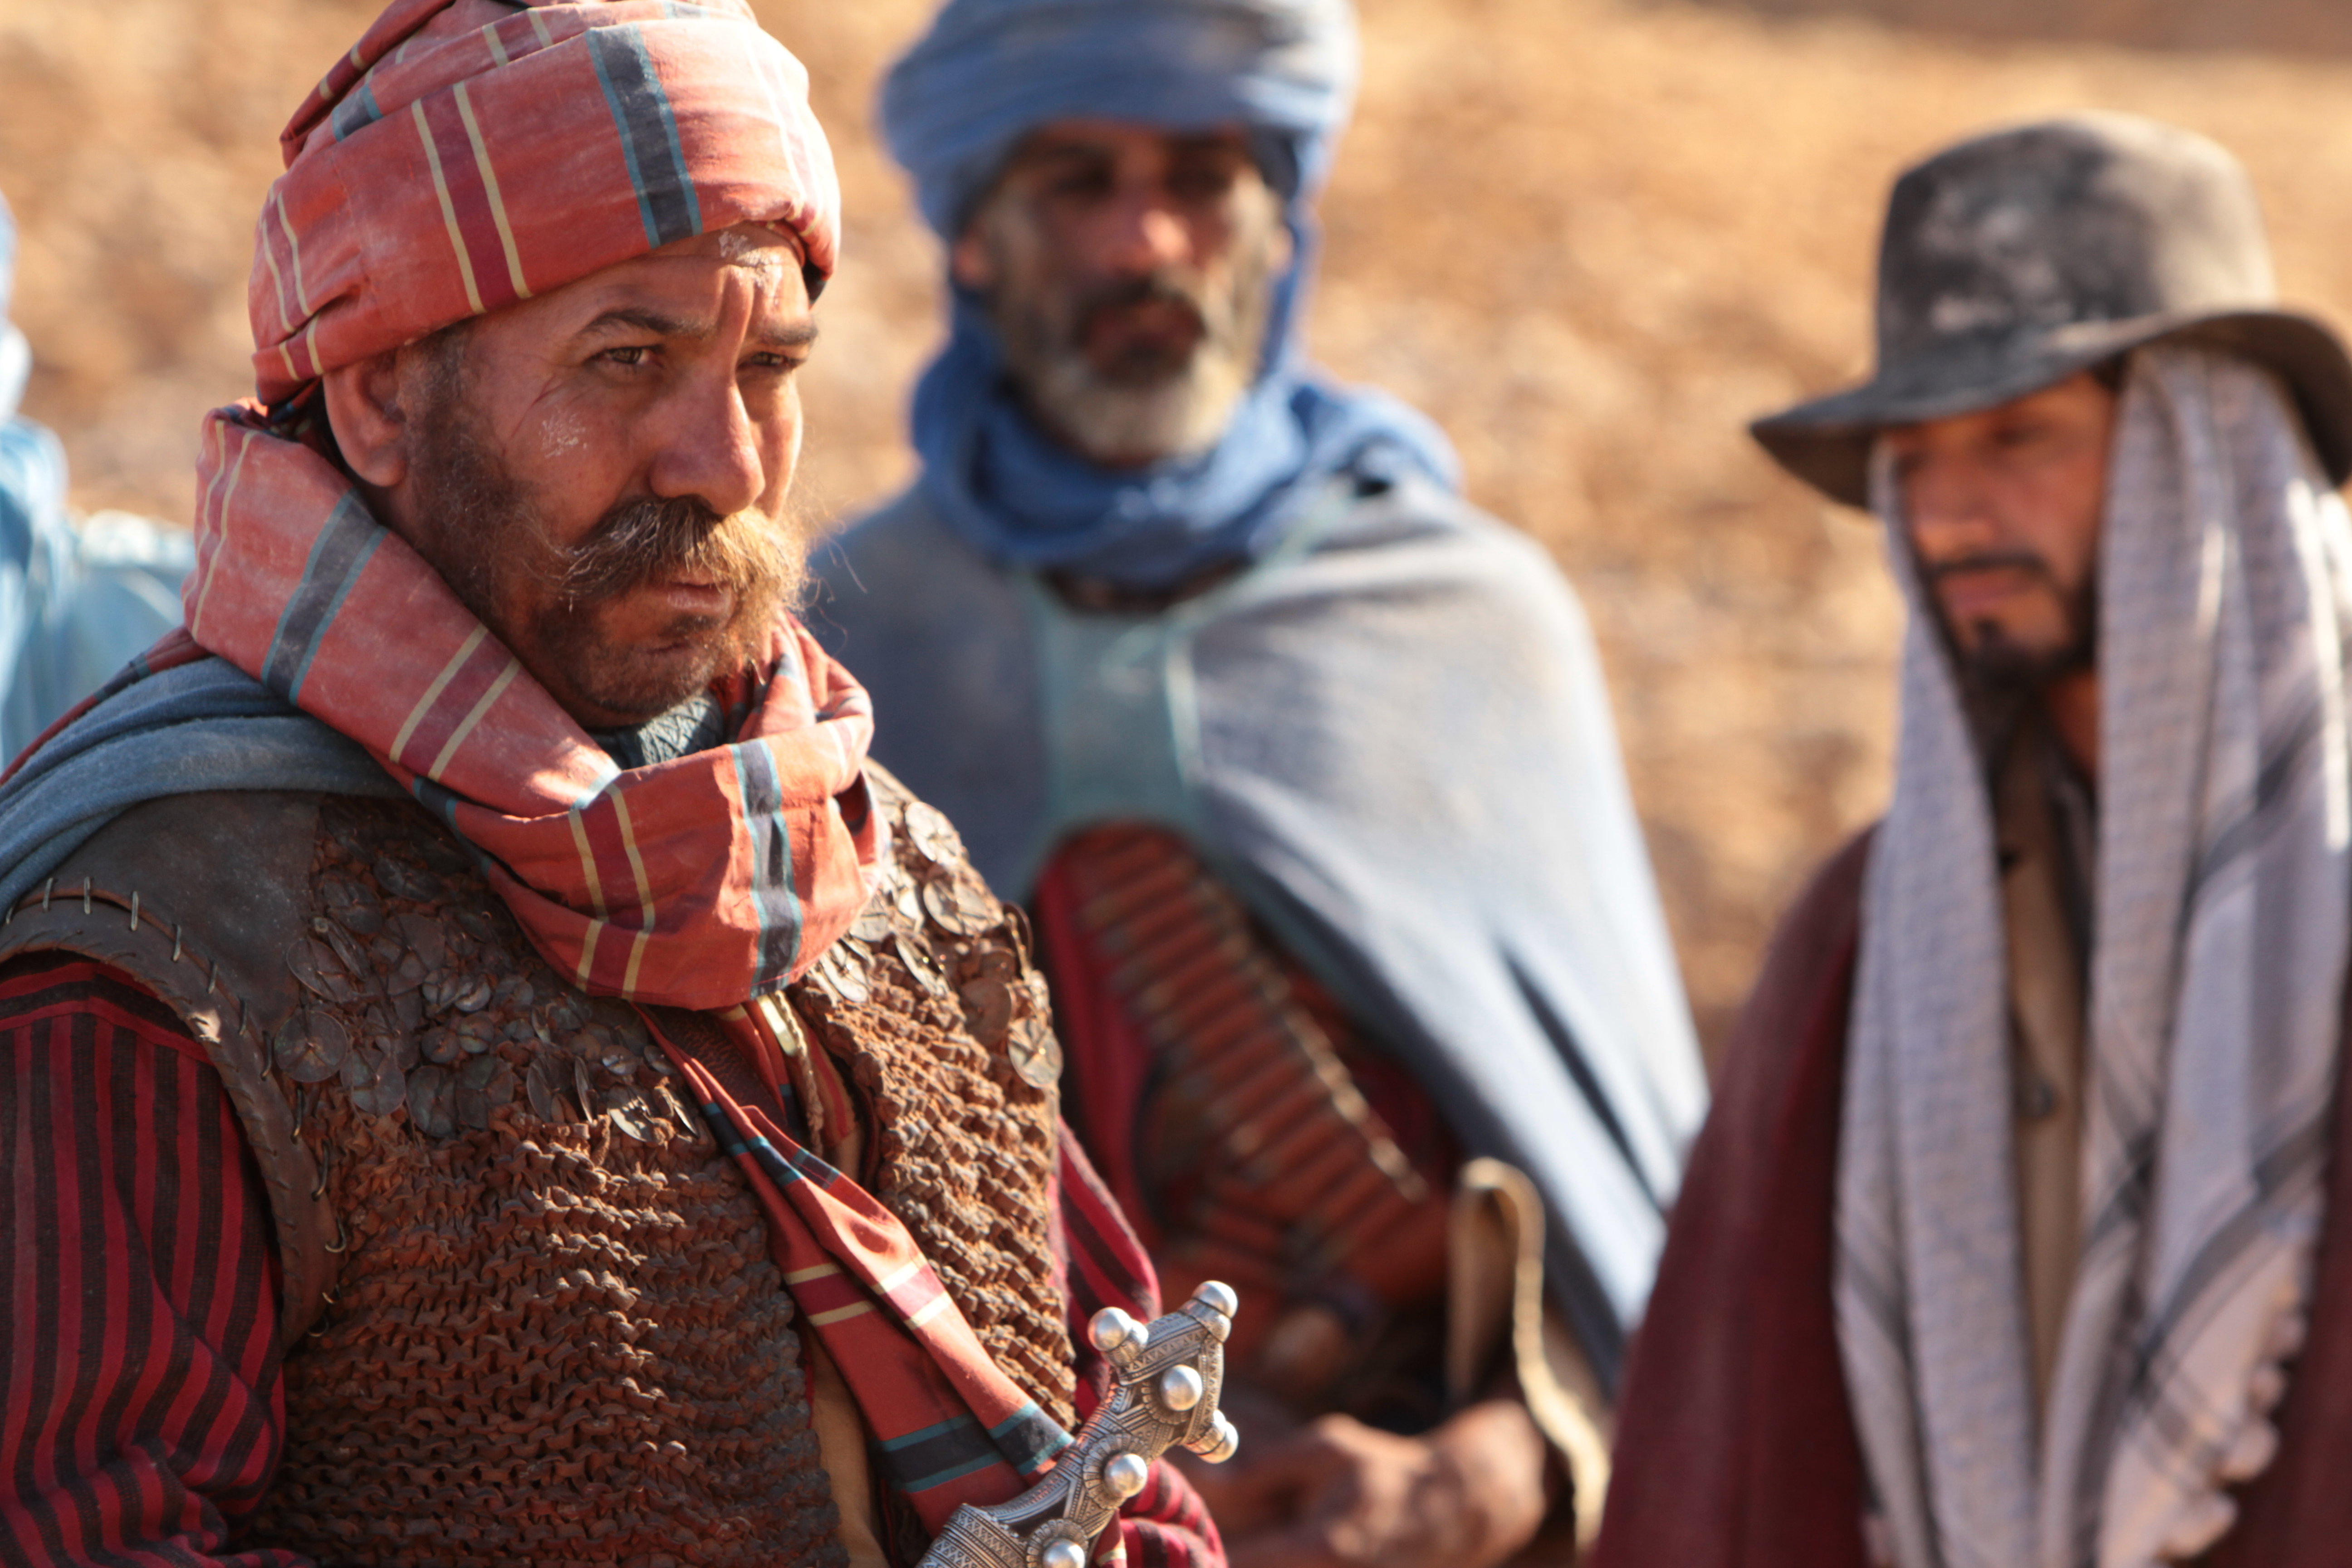 Magrouf (Driss Roukhe) with Ali (Riz Ahmed) and other tribes men